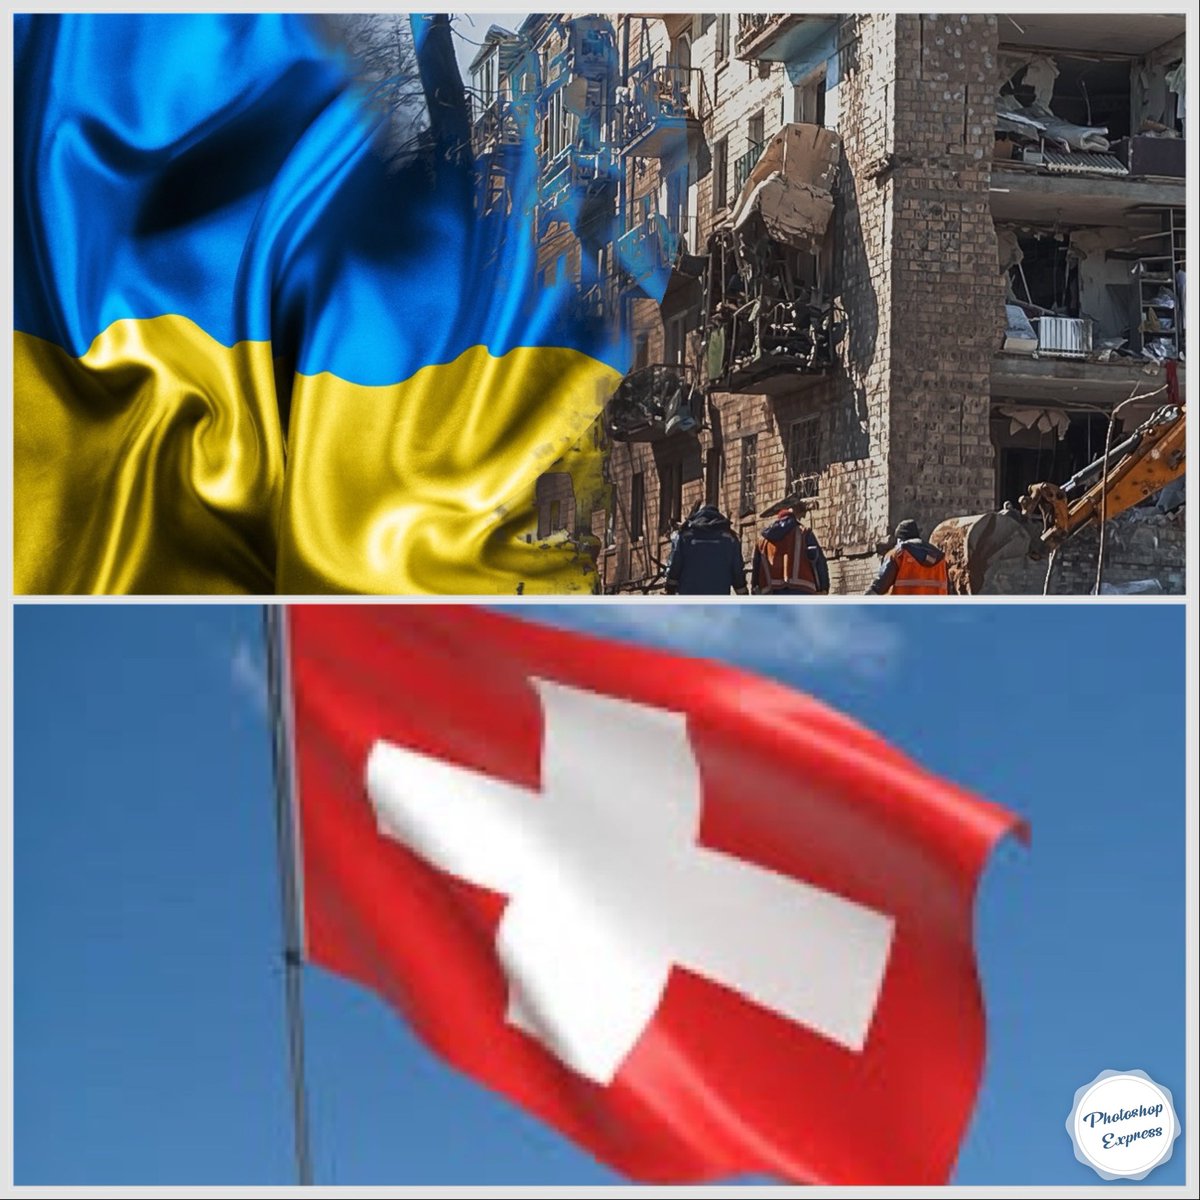 A Swiss parliamentary committee has voted to allocate $5.5 billion to support Ukraine in the reconstruction and repair of day-to-day infrastructure necessary for life and survival in Ukraine, parliament said. The plan, which still has to pass a series of parliamentary hurdles…